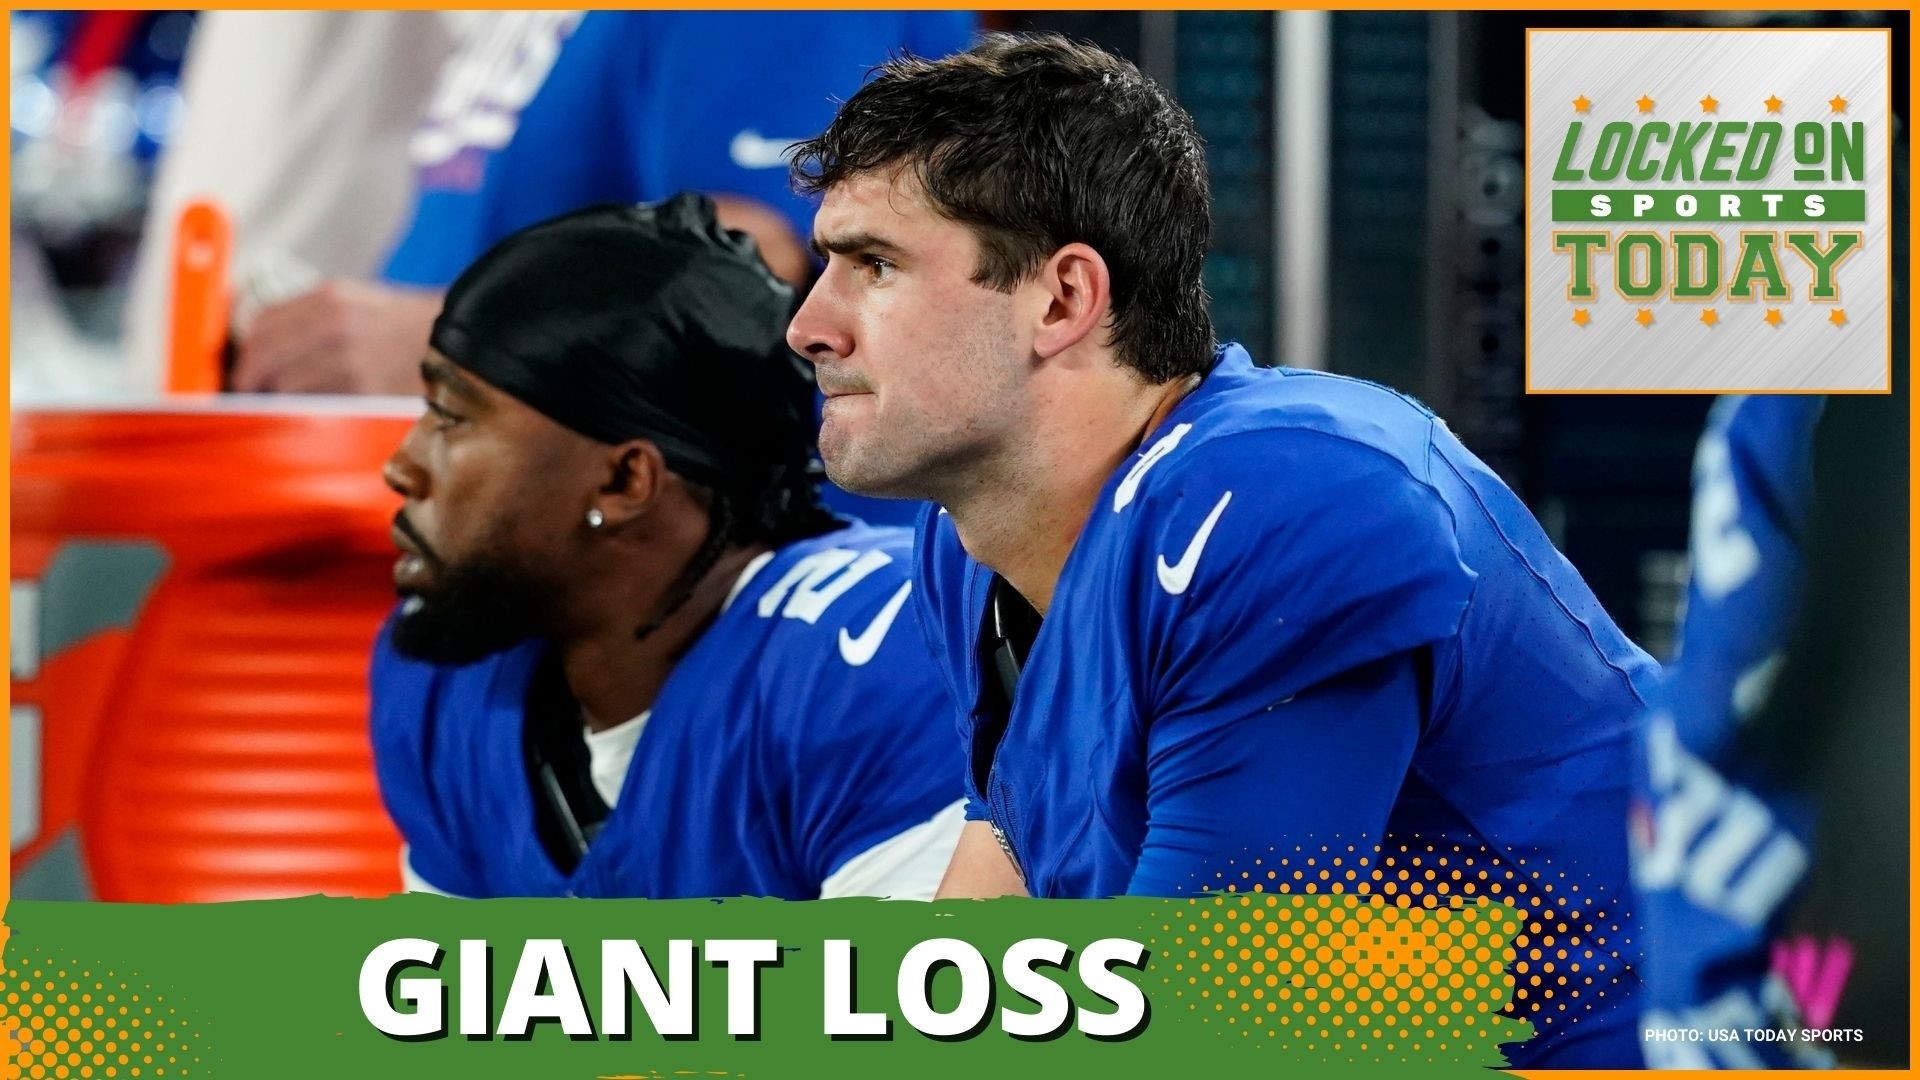 New York Giants Injury Report: All Give It a Go - Sports